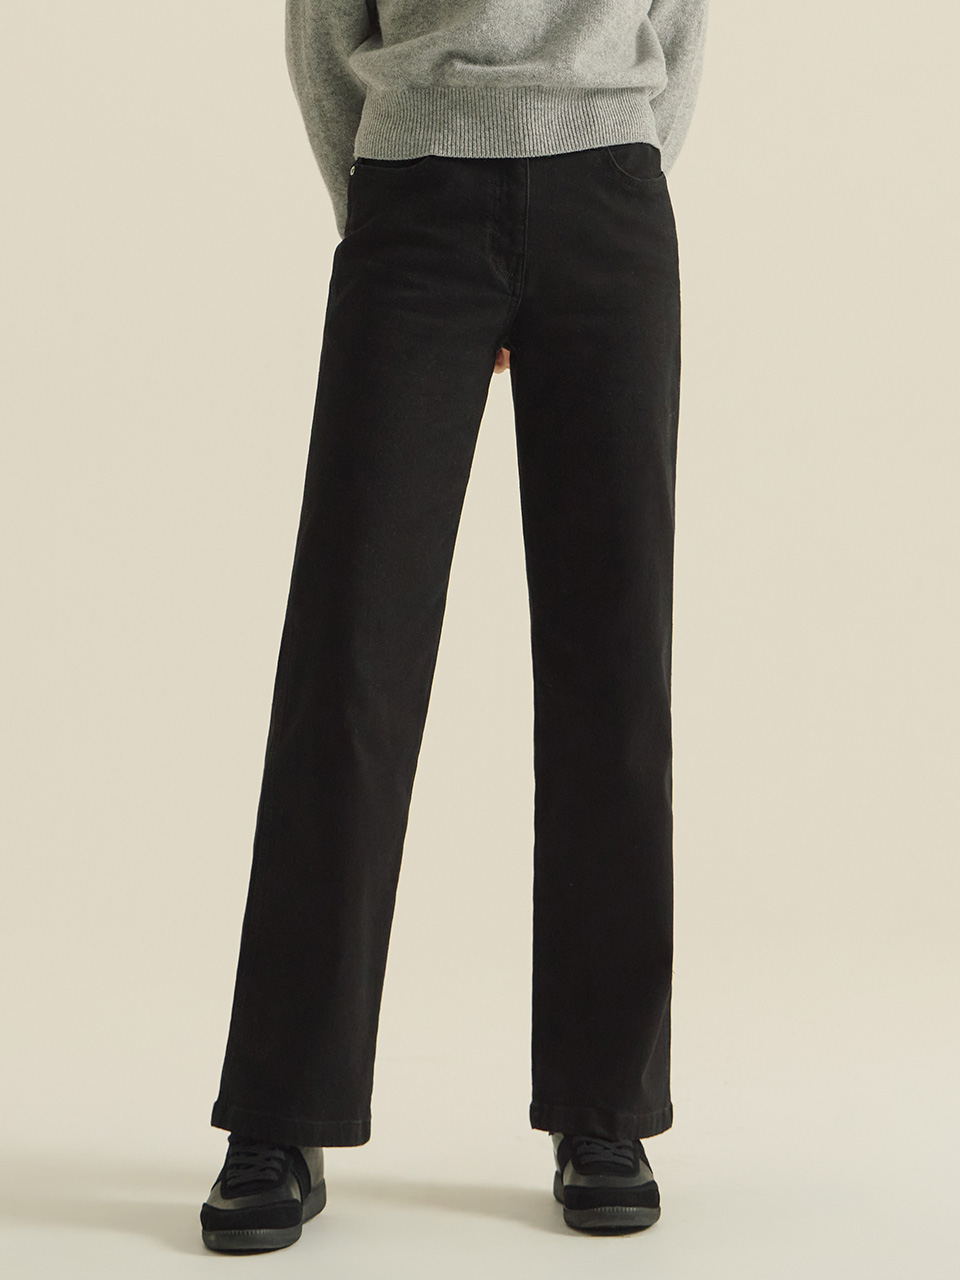 [LIMITED] RELAX-FIT STRETCH NAPPING DENIM PANTS (FOR WOMAN) - CARBON BLACK